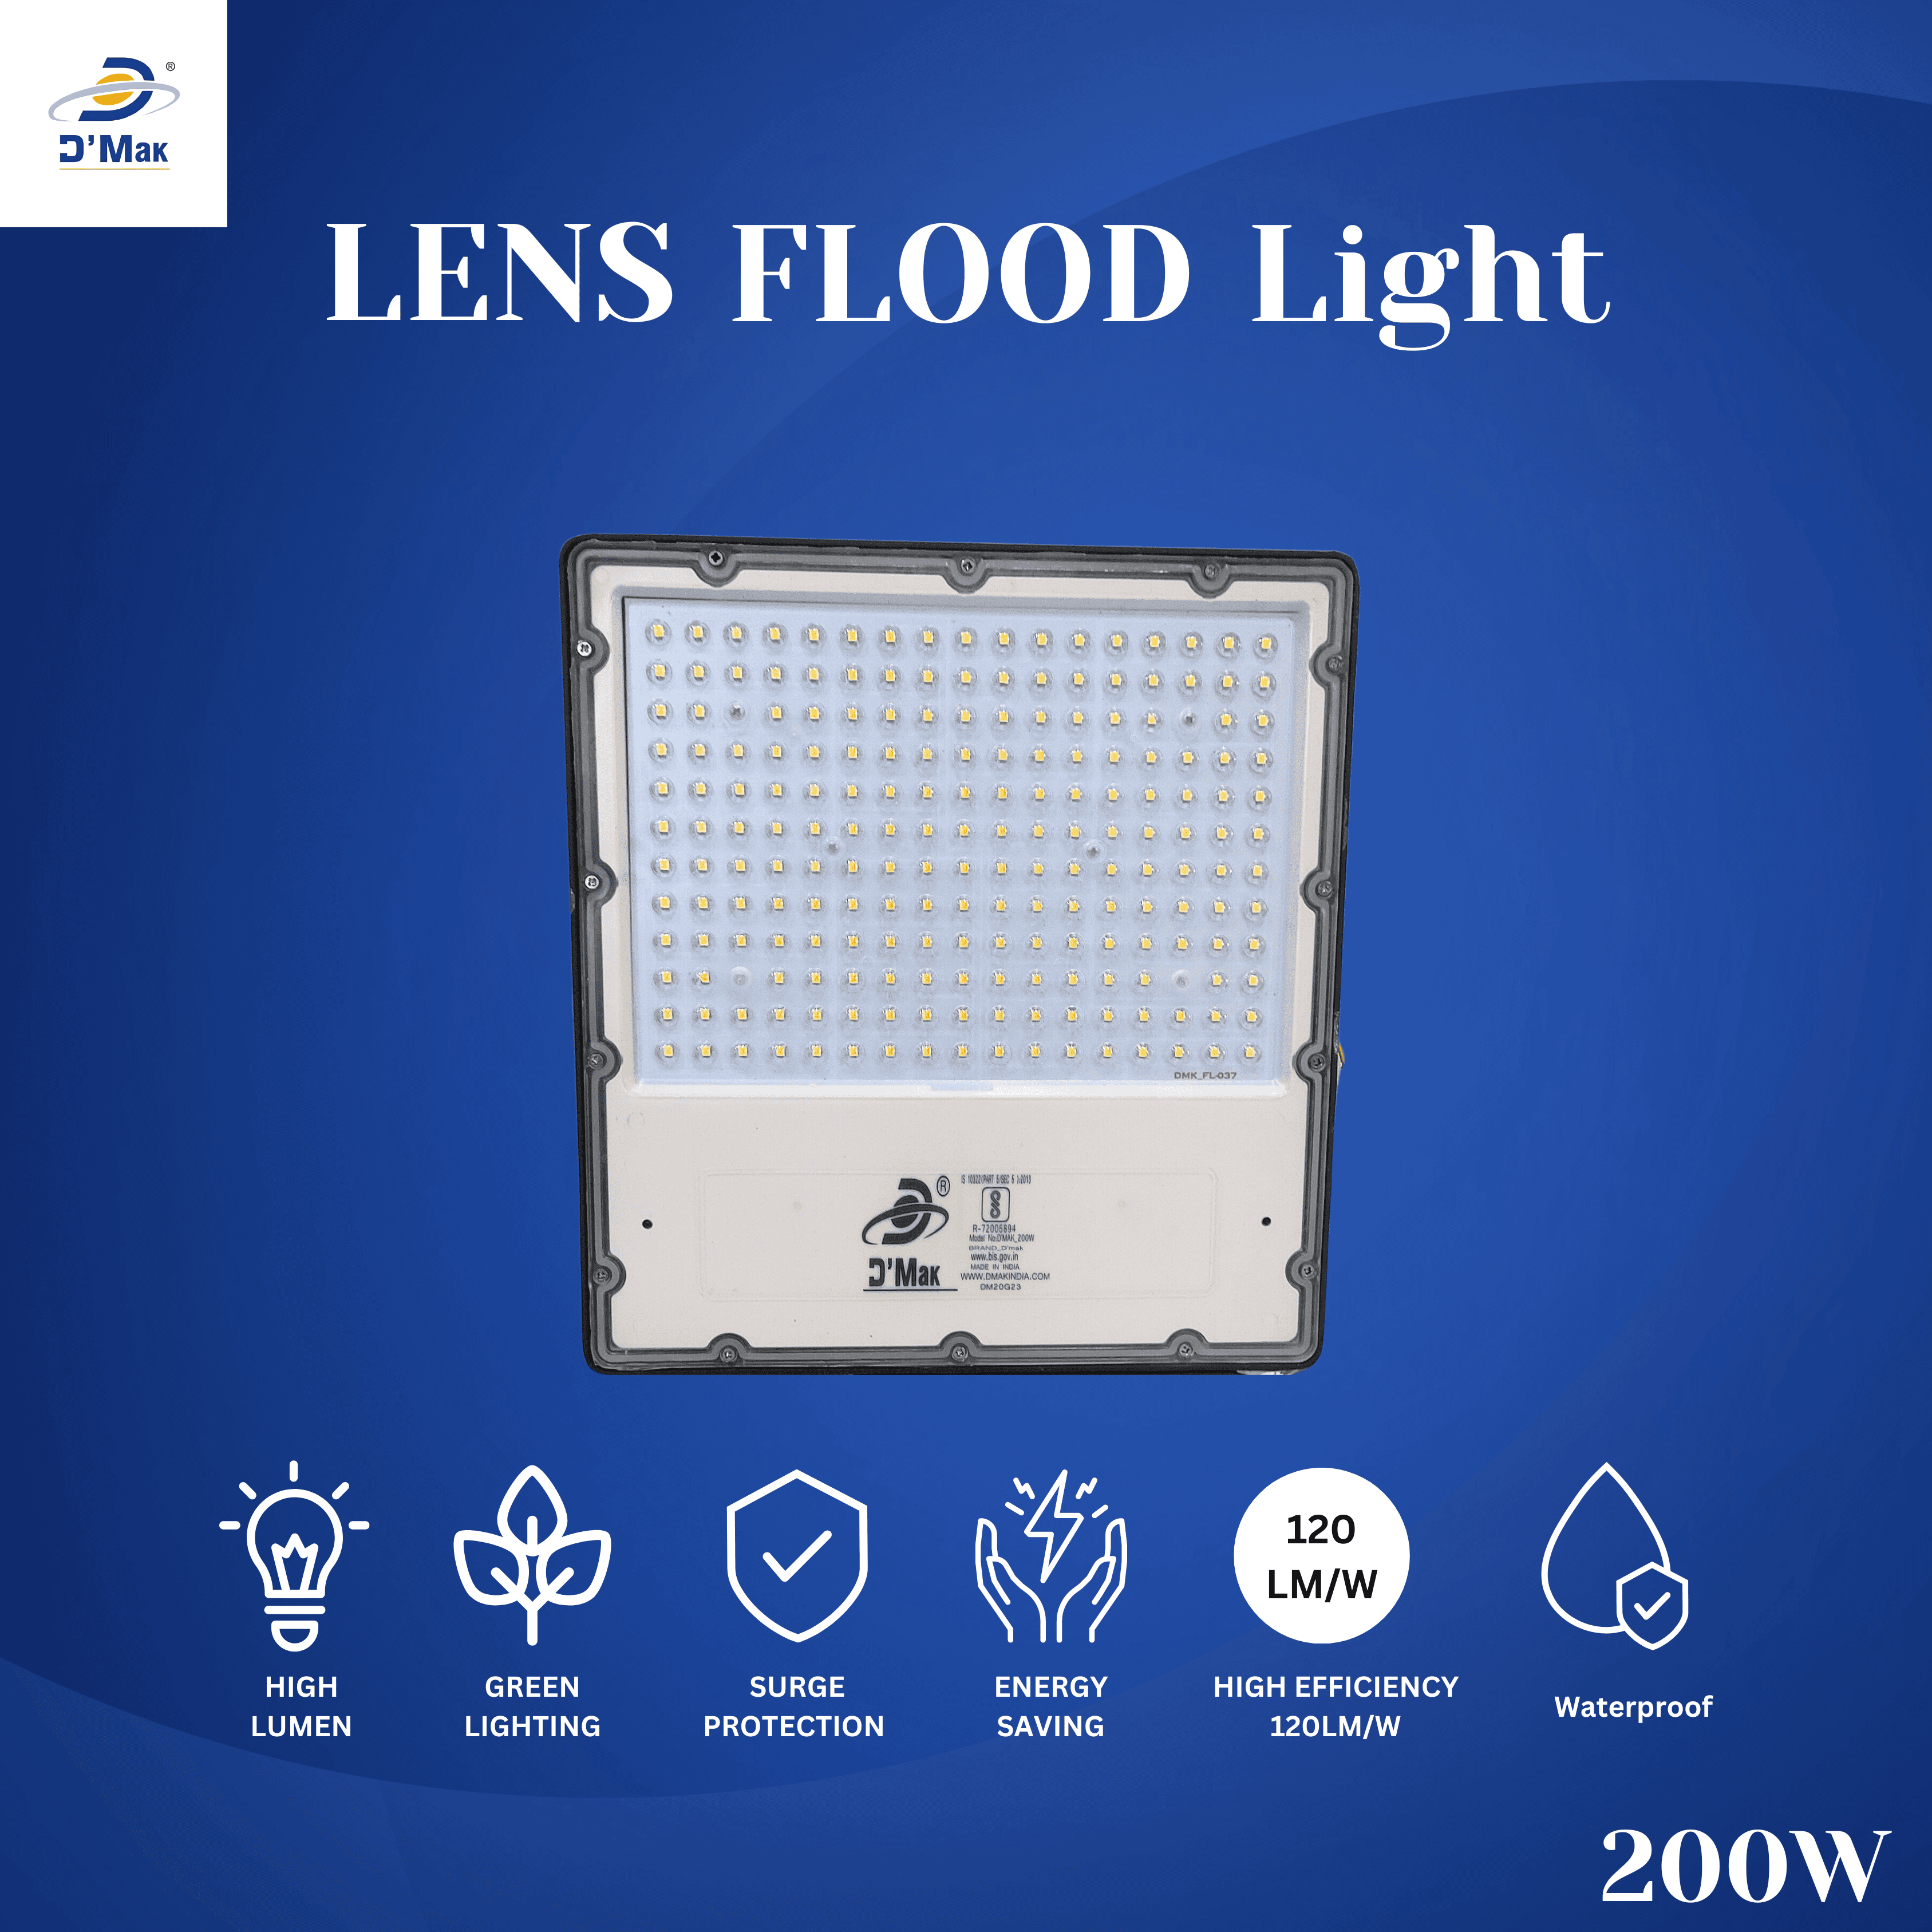 200 Watt LED Flood Light With Lens White Body Waterproof IP65 for Outdoor Purposes